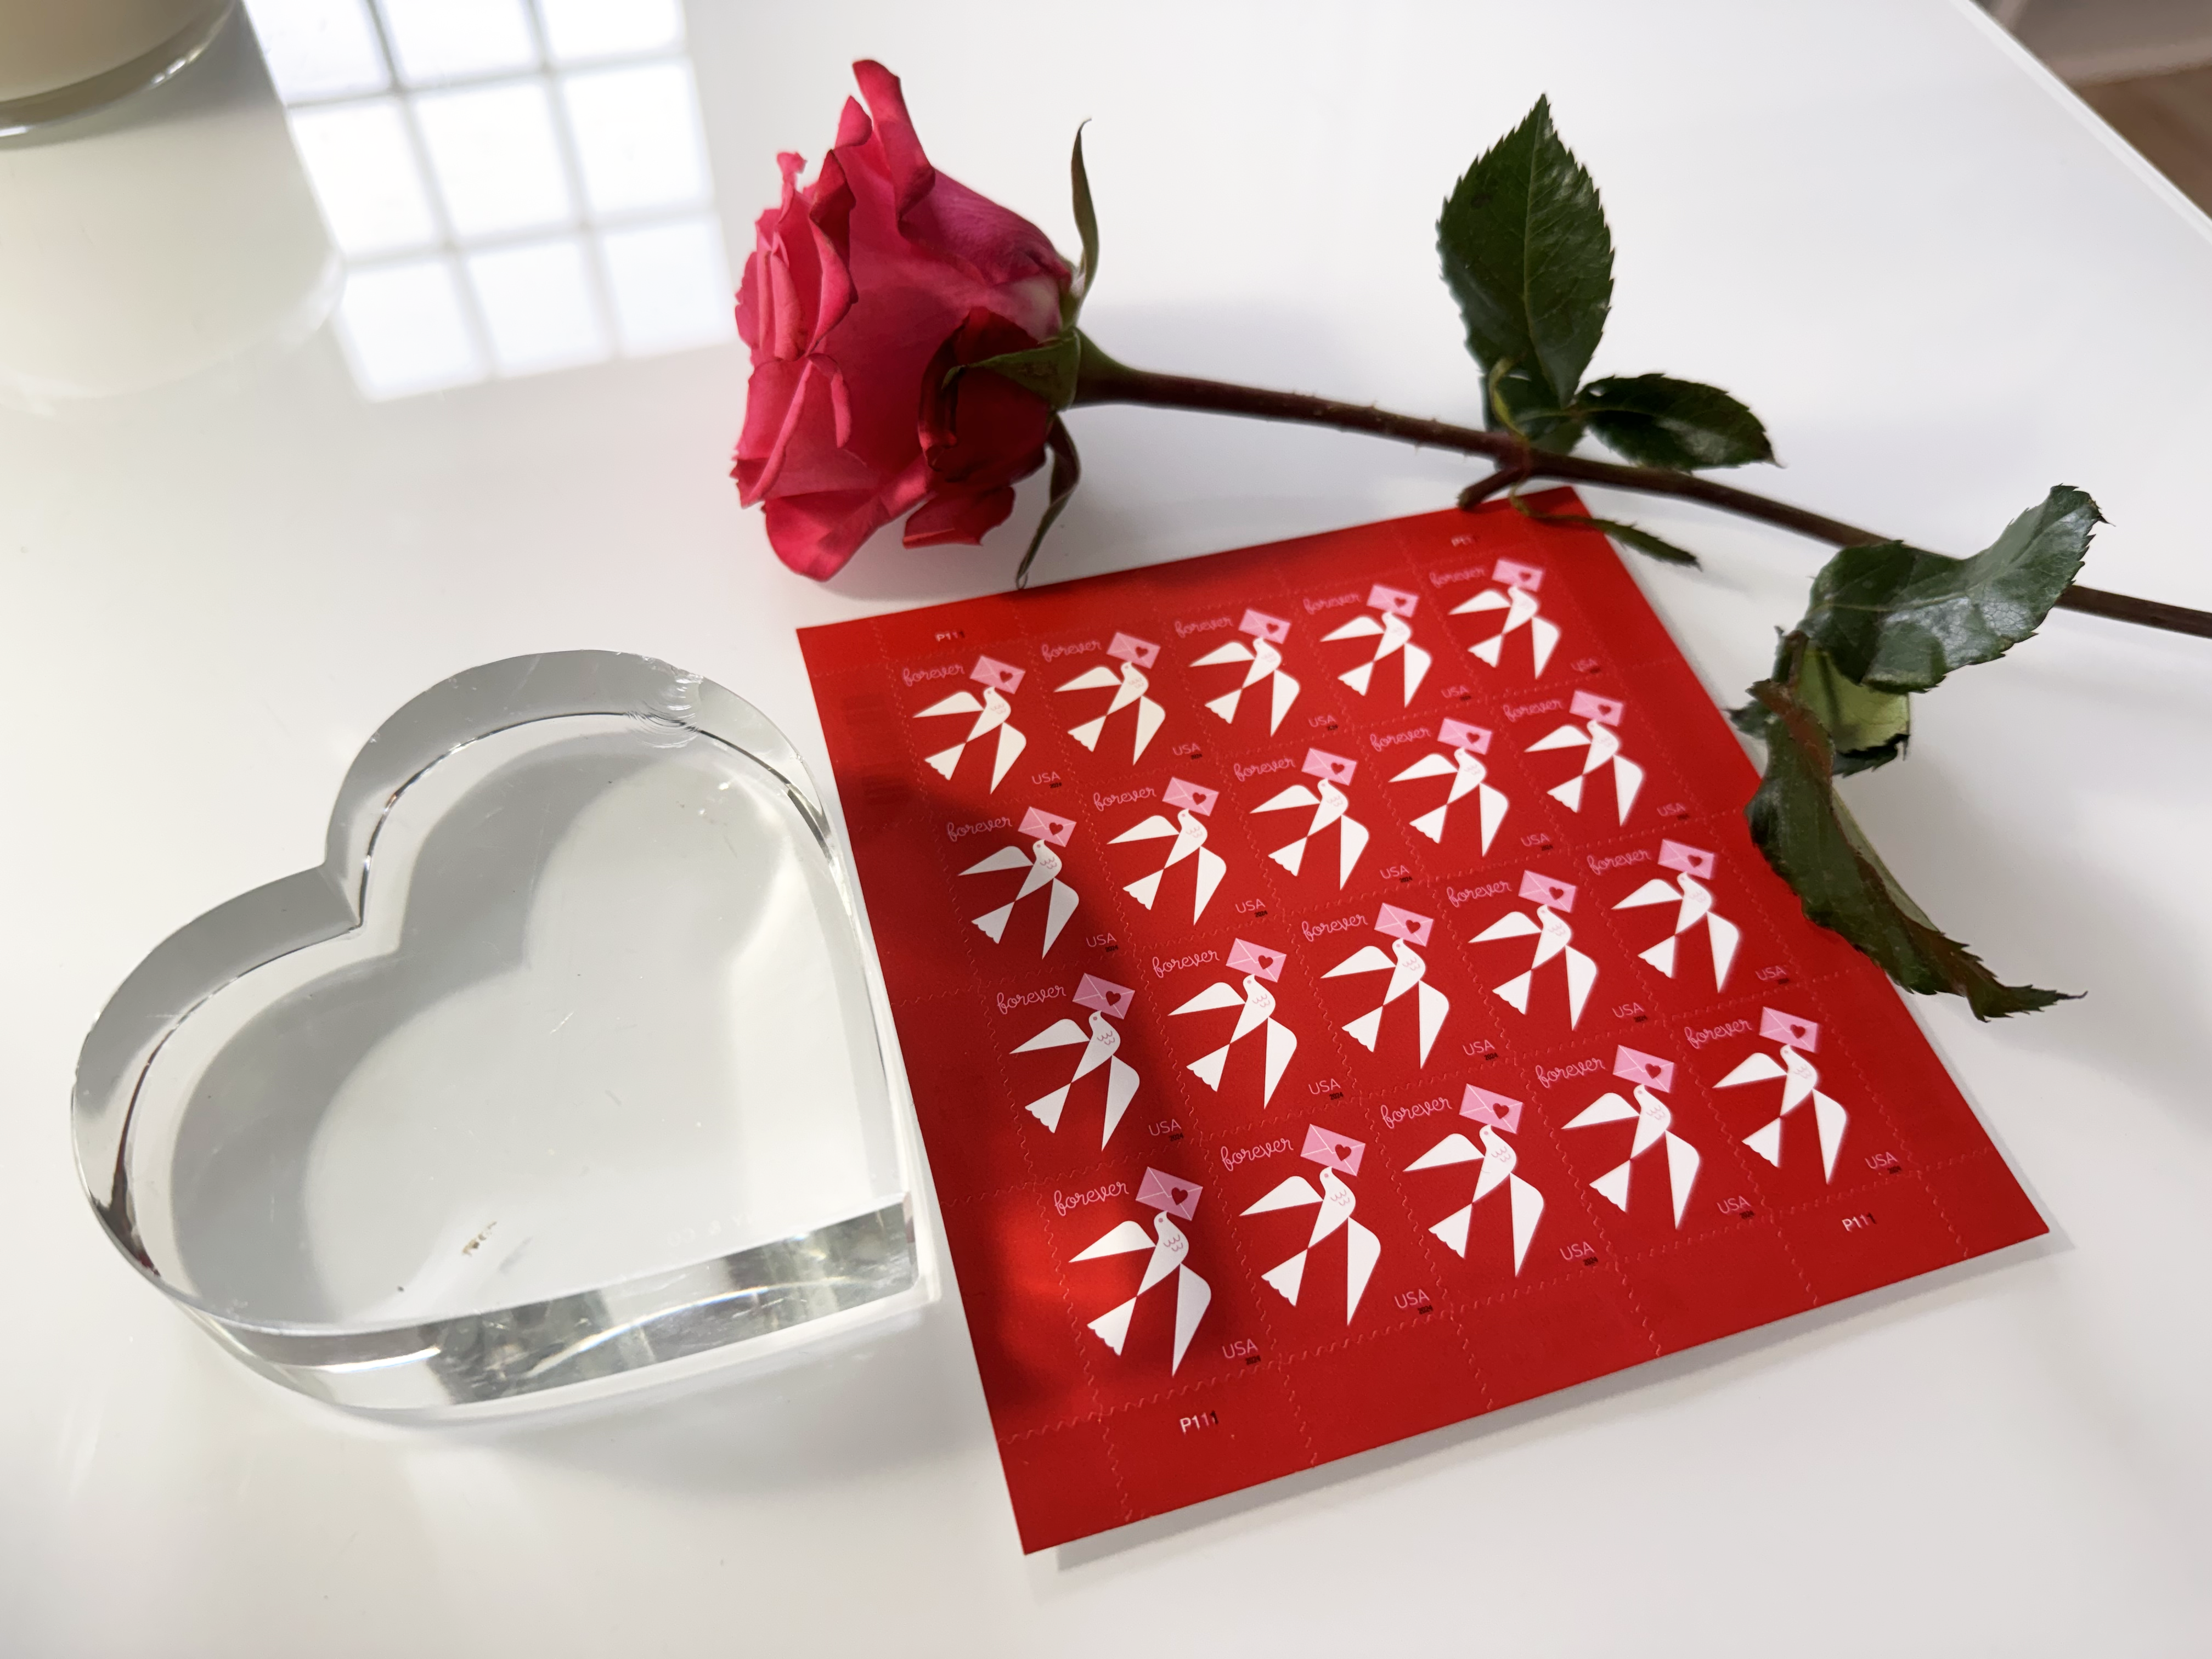 Red Forever stamps with a red rose and a heart-shaped paperweight